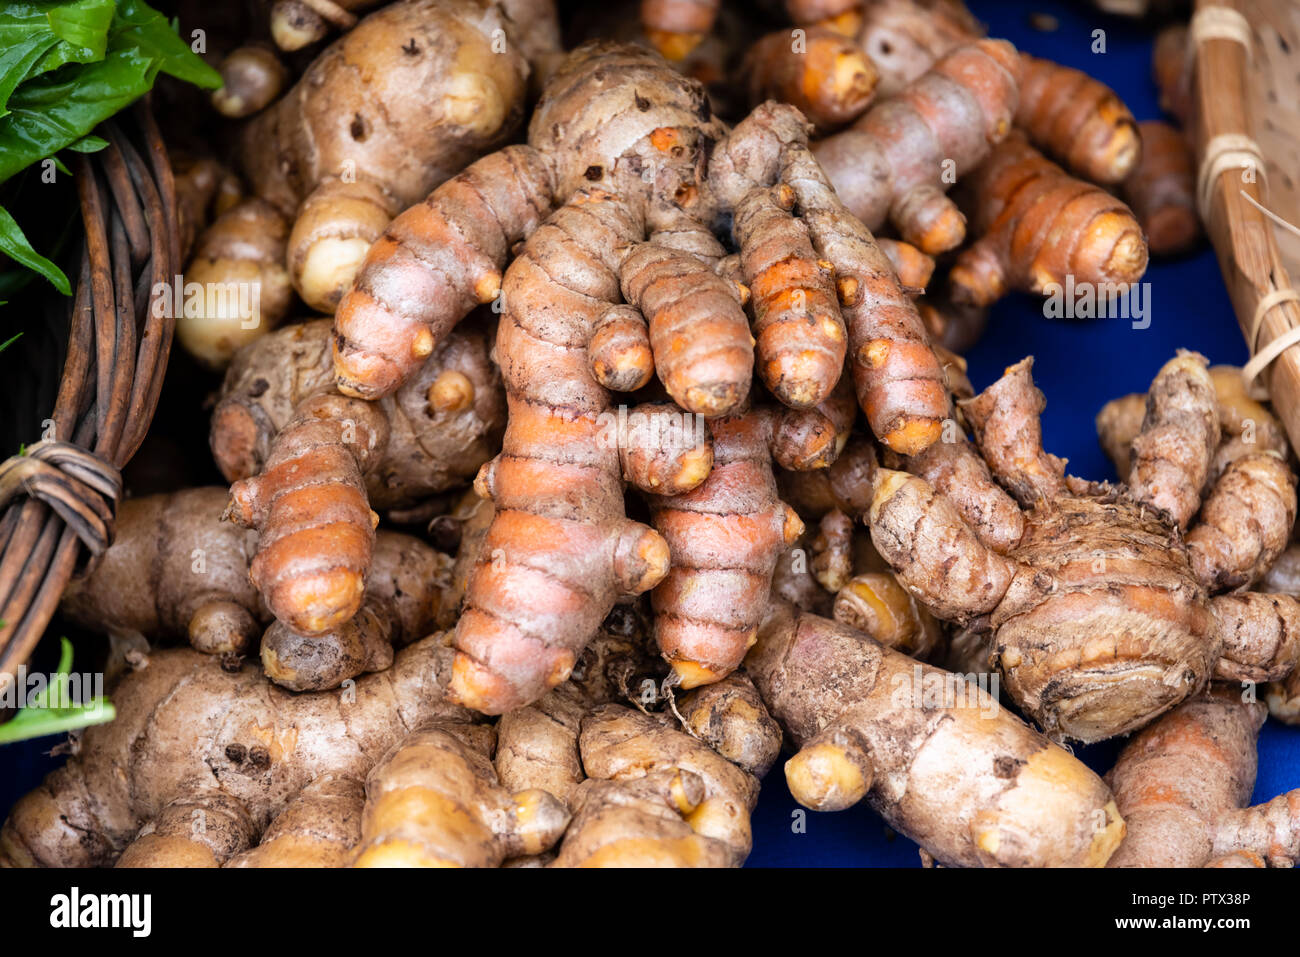 Tumeric root on display at the farmers market Stock Photo